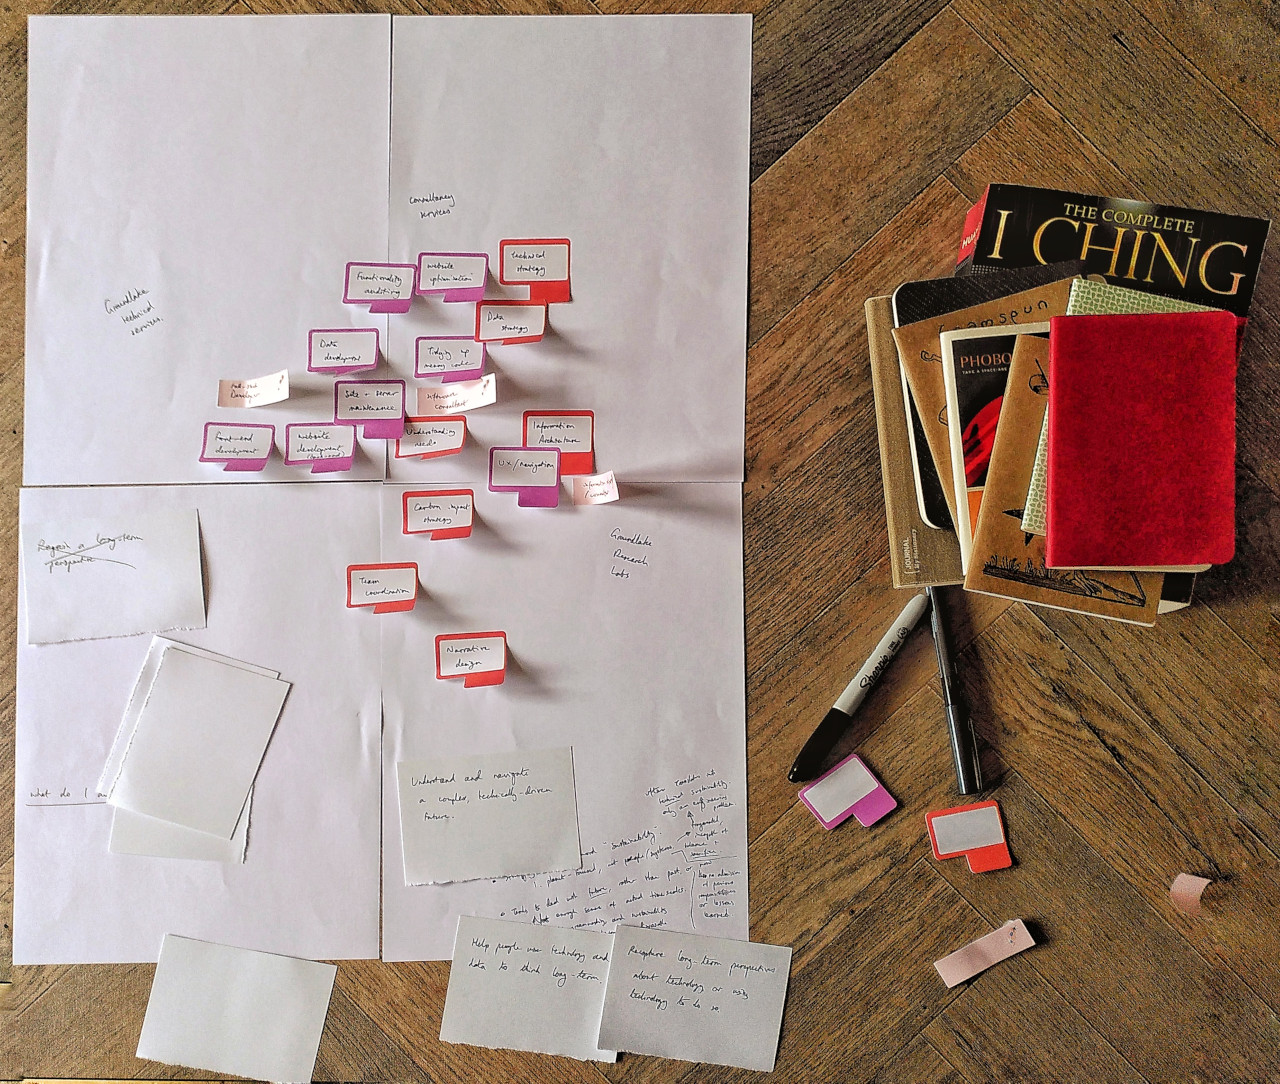 Photo showing a variety of coloured post-it notes scattered around 4 A4 pieces of paper, with various handwritten notes scribbled around. Some pens, notebooks, and a copy of the I Ching sit alongside.